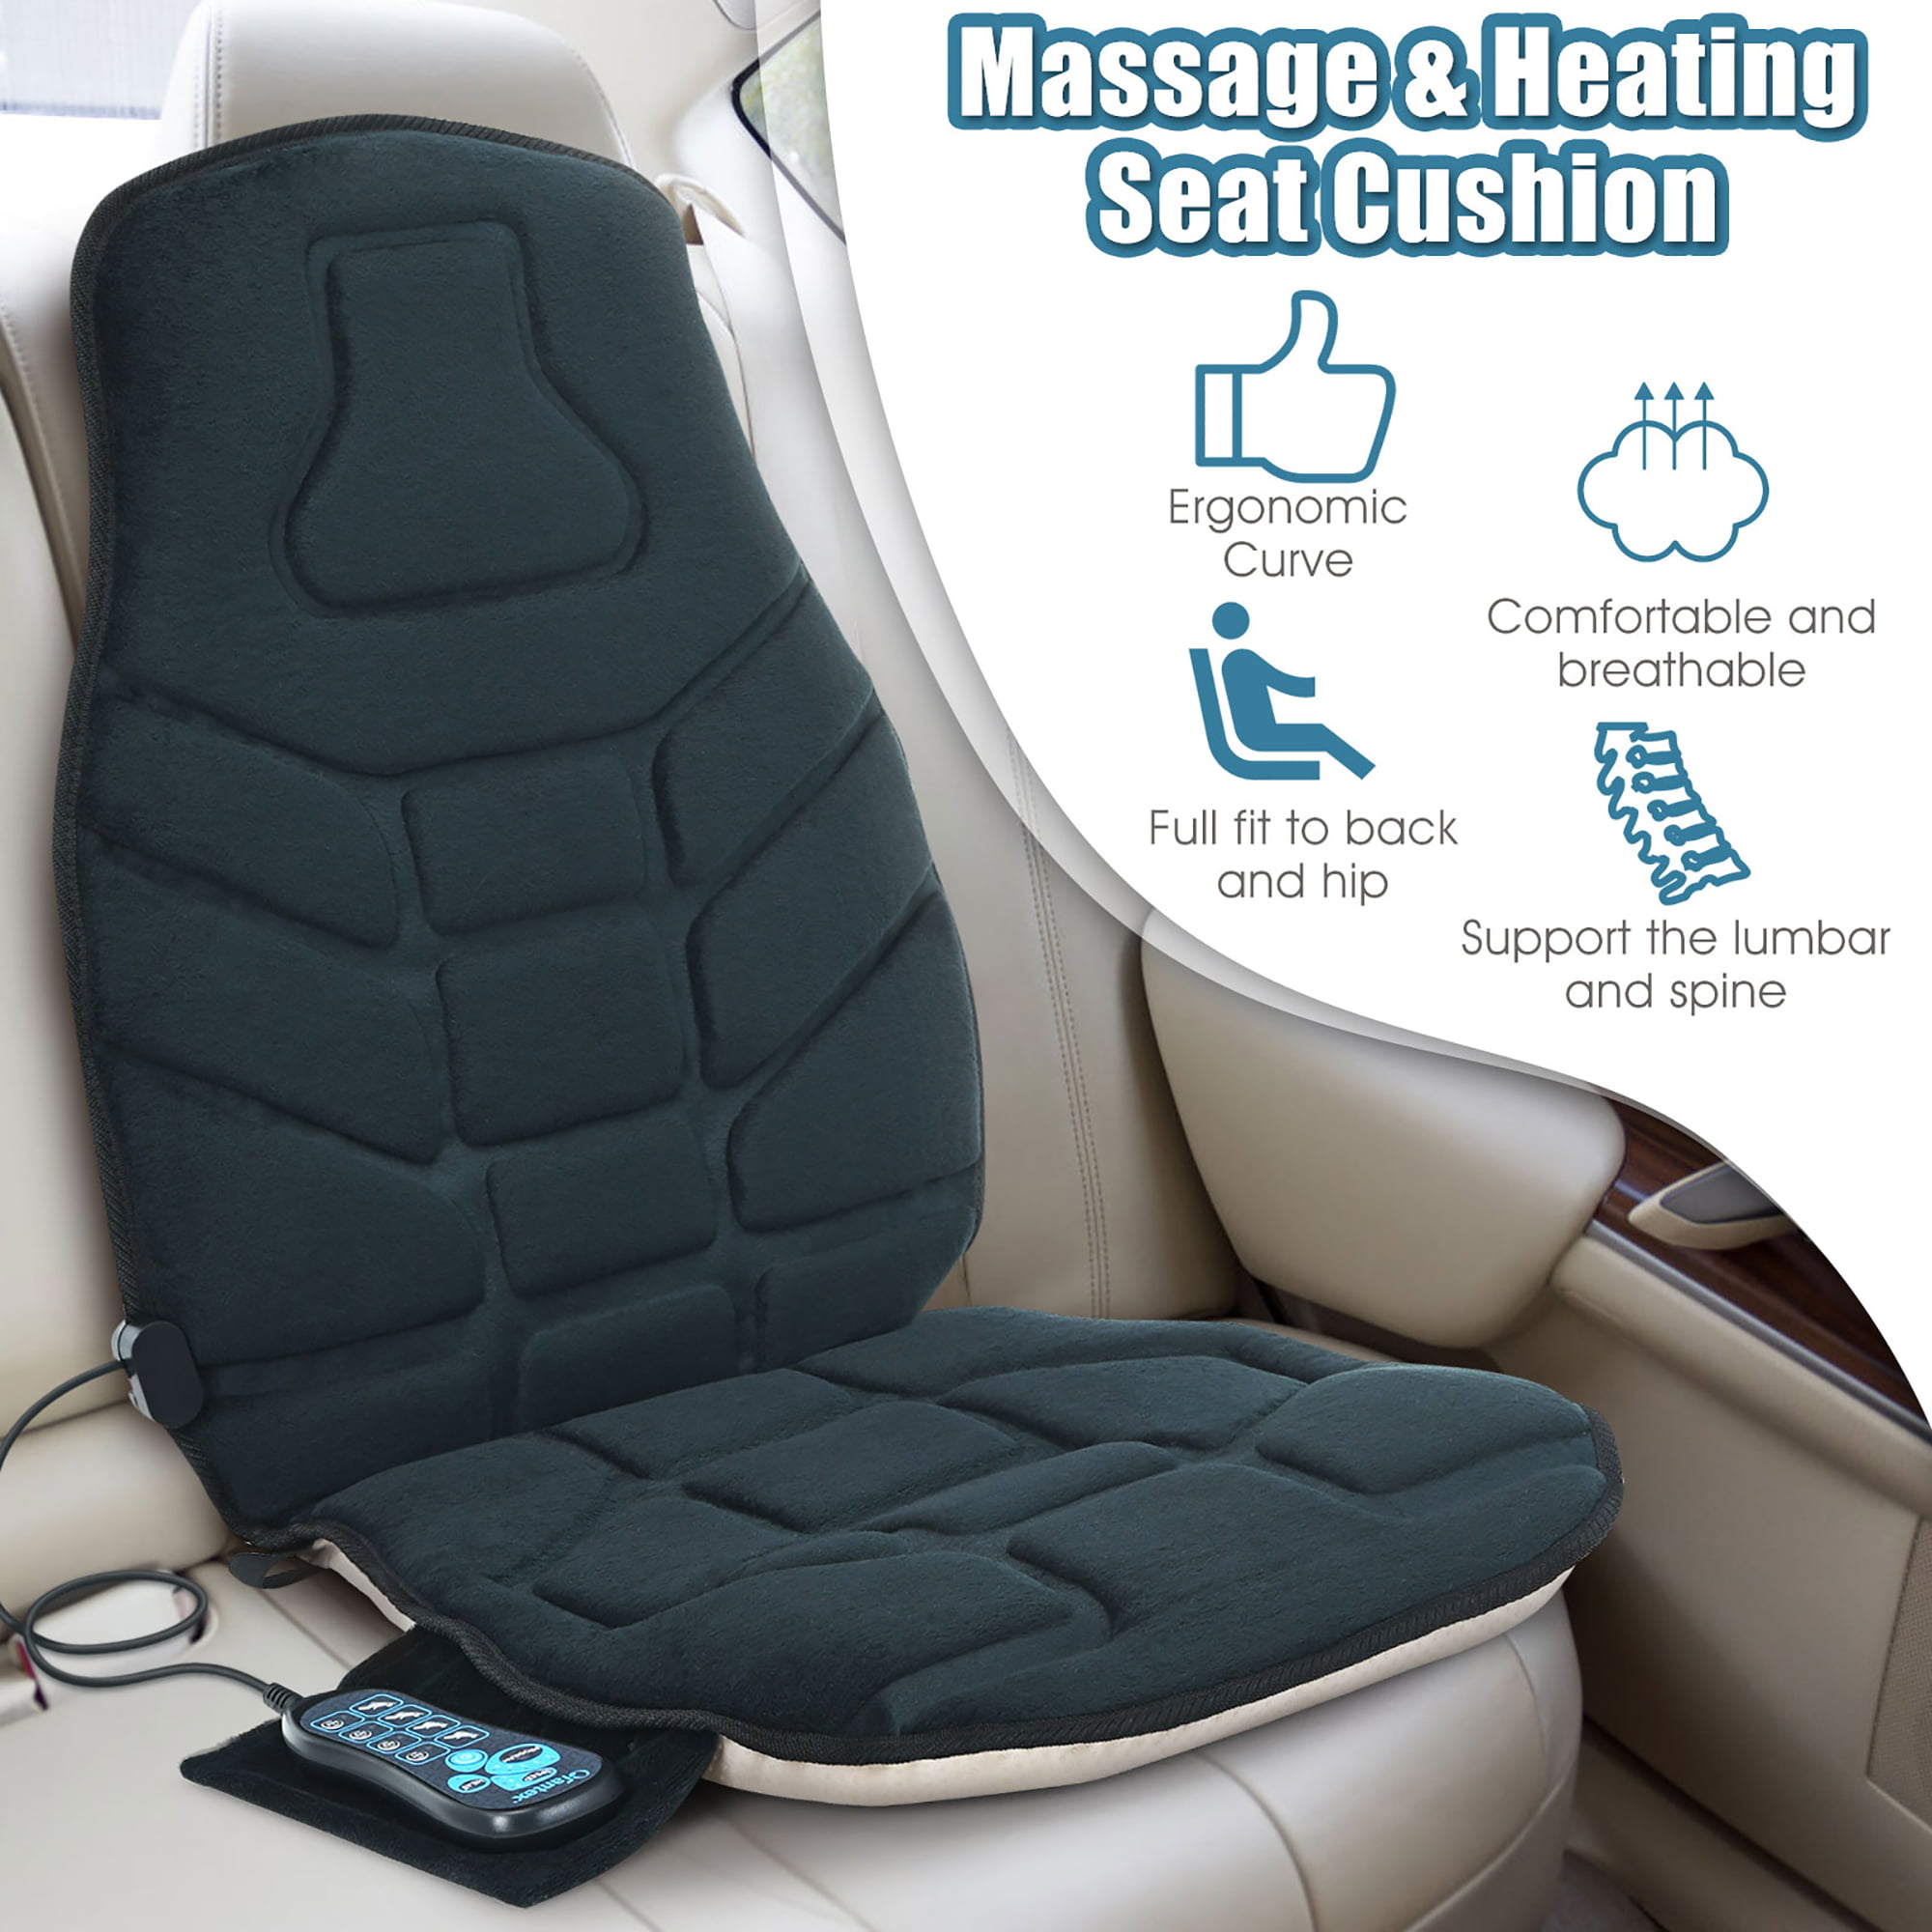 CARSHION Massage Seat Cushion with Heat Back Massager Heated Seat Cover  with 5 Vibrating Massage Nod…See more CARSHION Massage Seat Cushion with  Heat